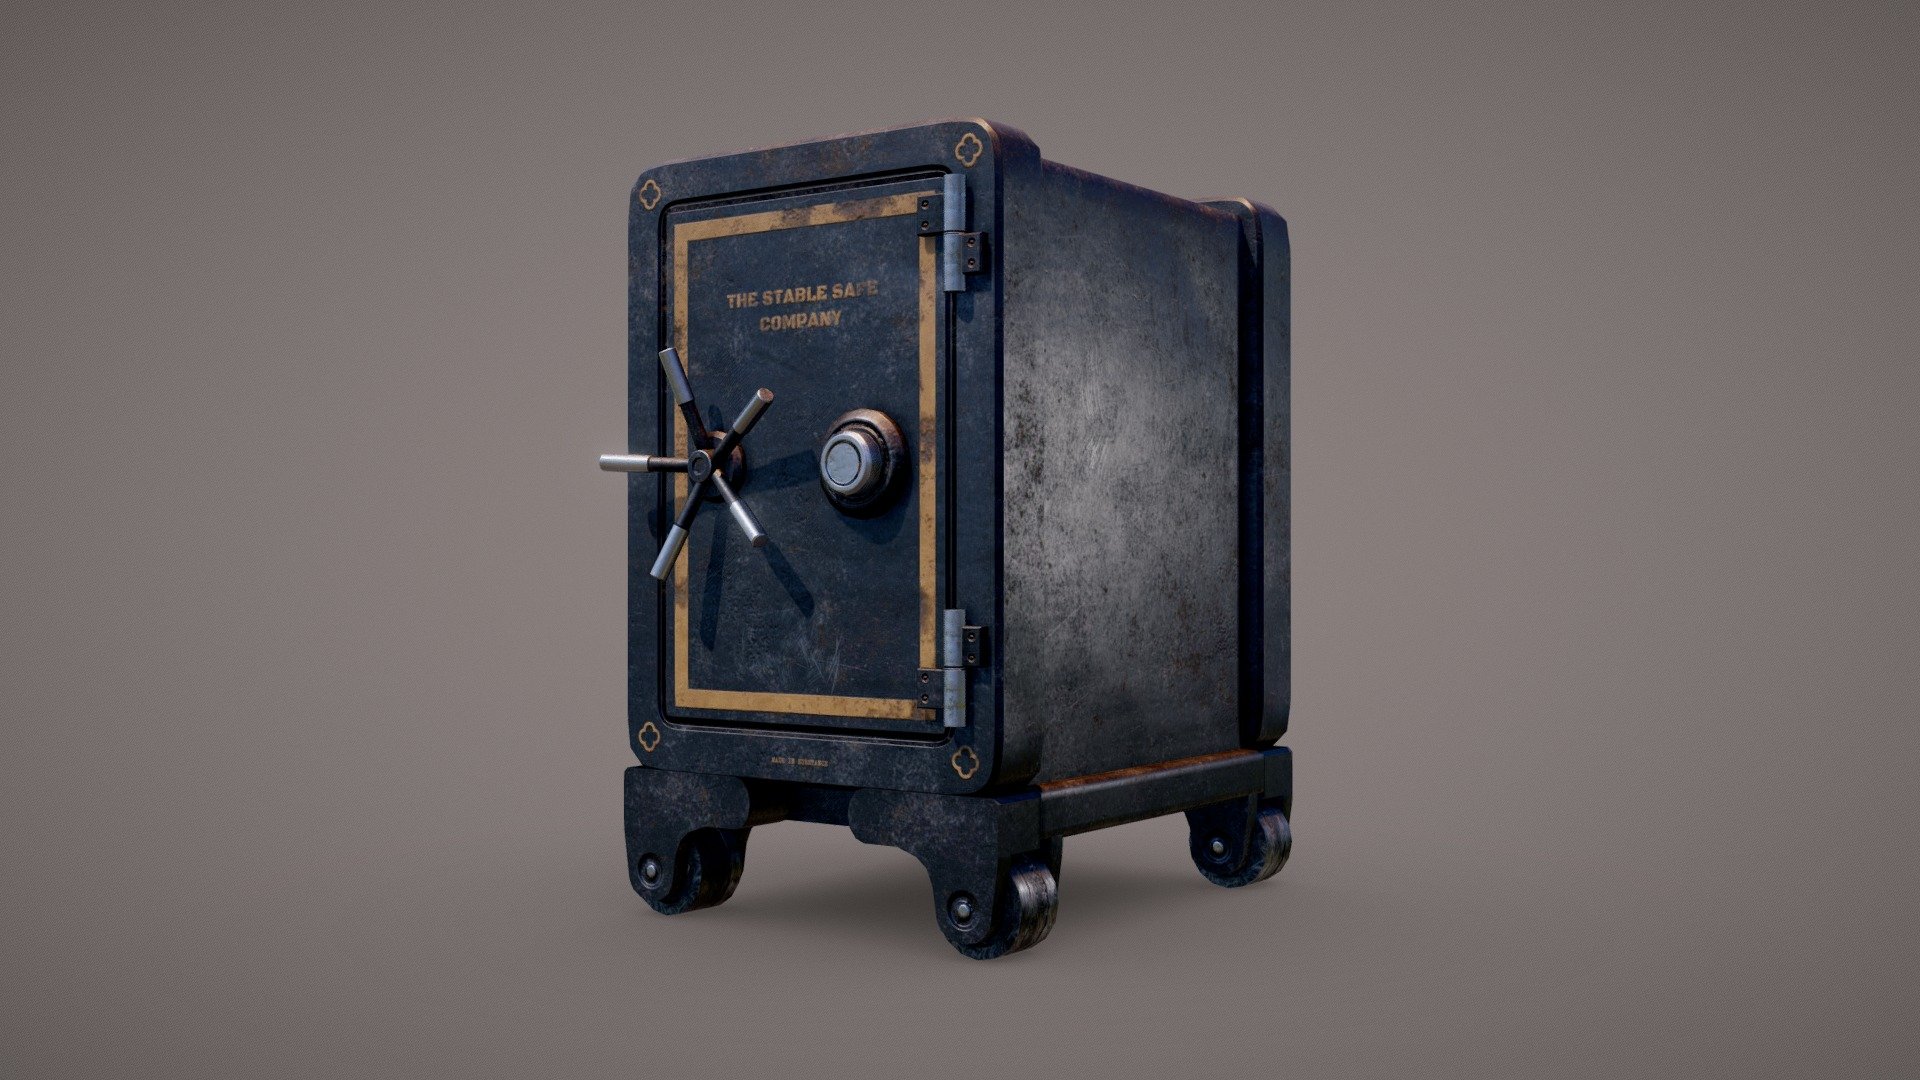 Antique Iron safe based on styles of the wild west. Game ready asset. Details sculpted in Zbrush and textured in Substance Painter - Antique Iron Safe - Download Free 3D model by pixelgrapher 3d model